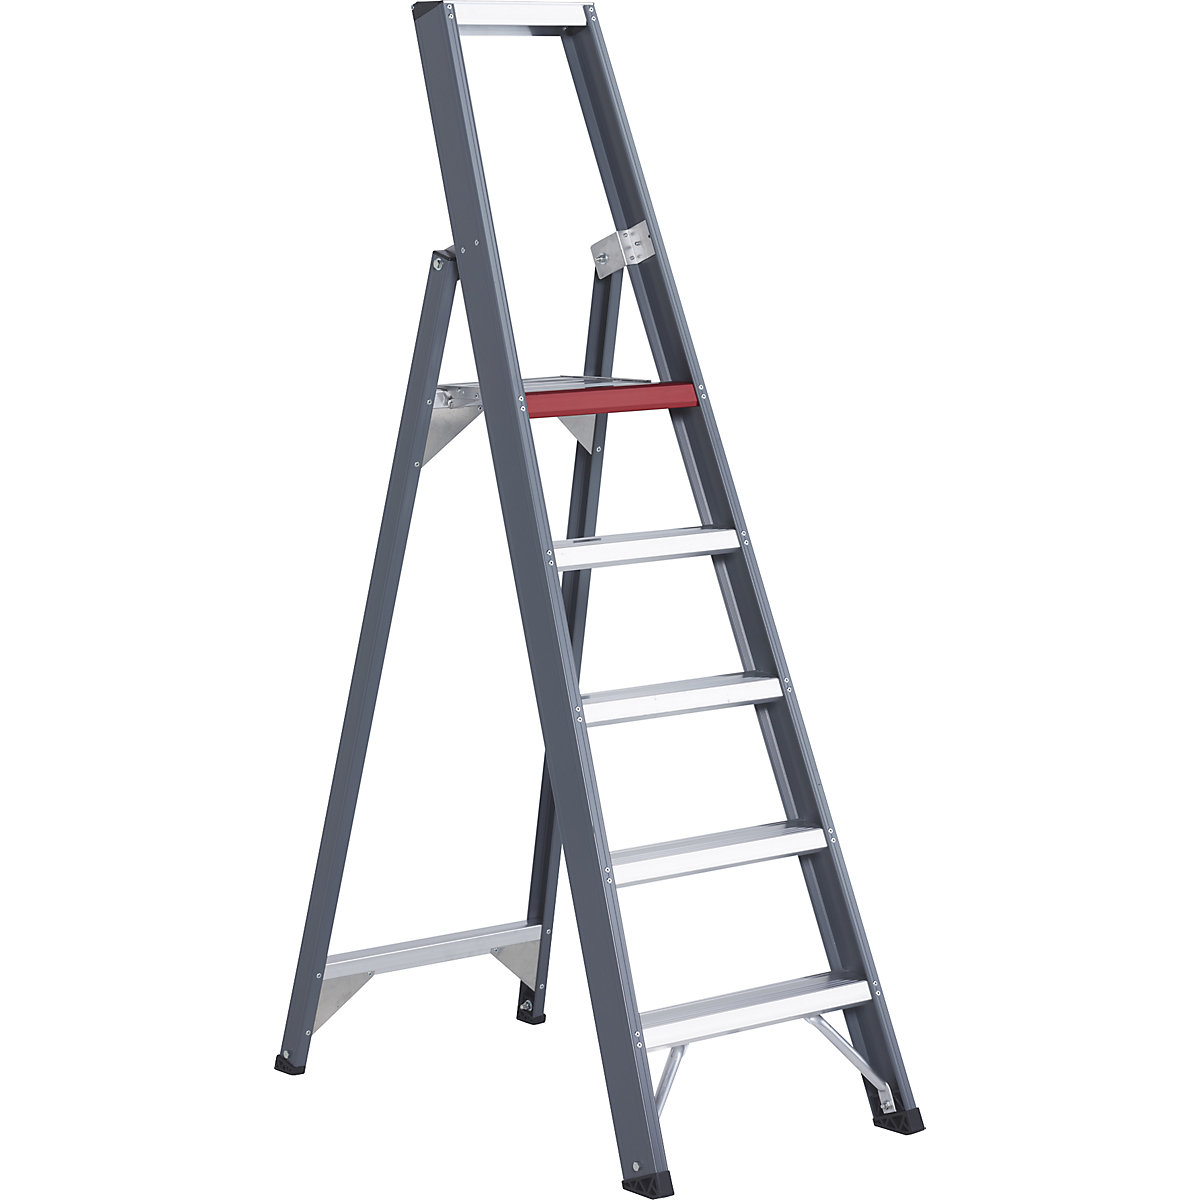 Aluminium step ladder, single sided access – Altrex, with storage tray, 5 steps, working height 3200 mm-9